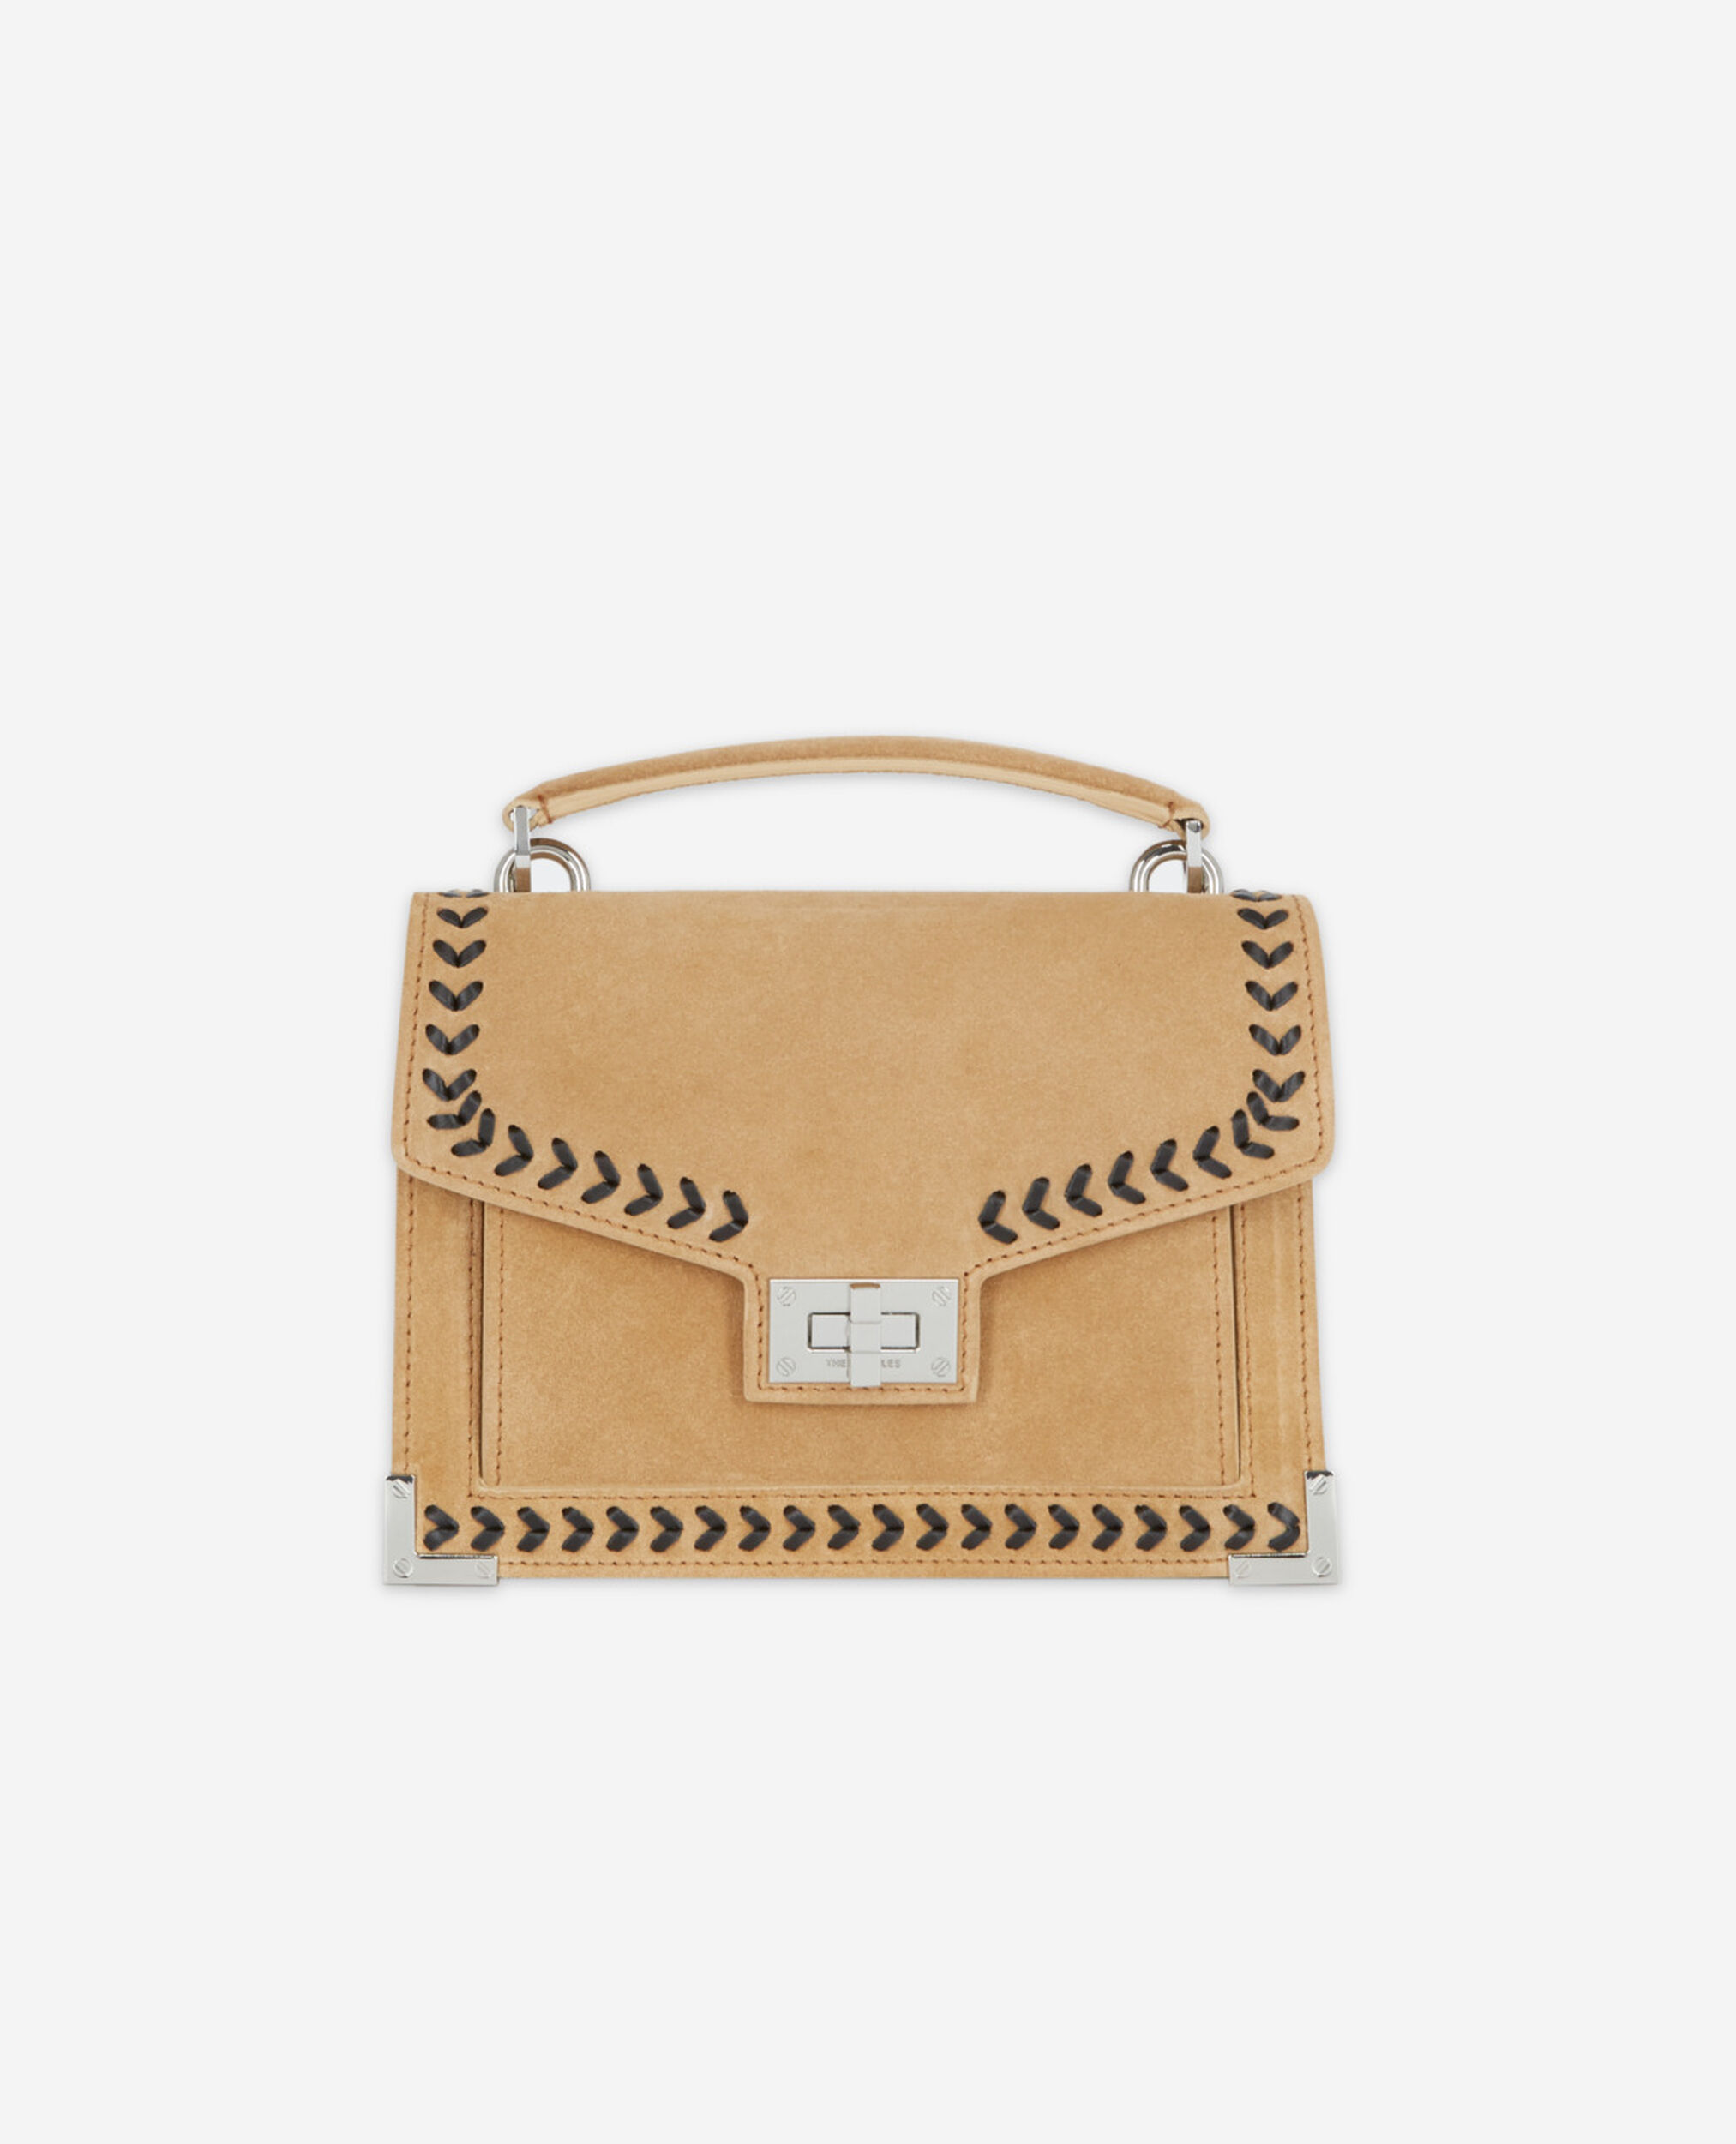 Small Emily bag in camel suede leather, CAMEL, hi-res image number null